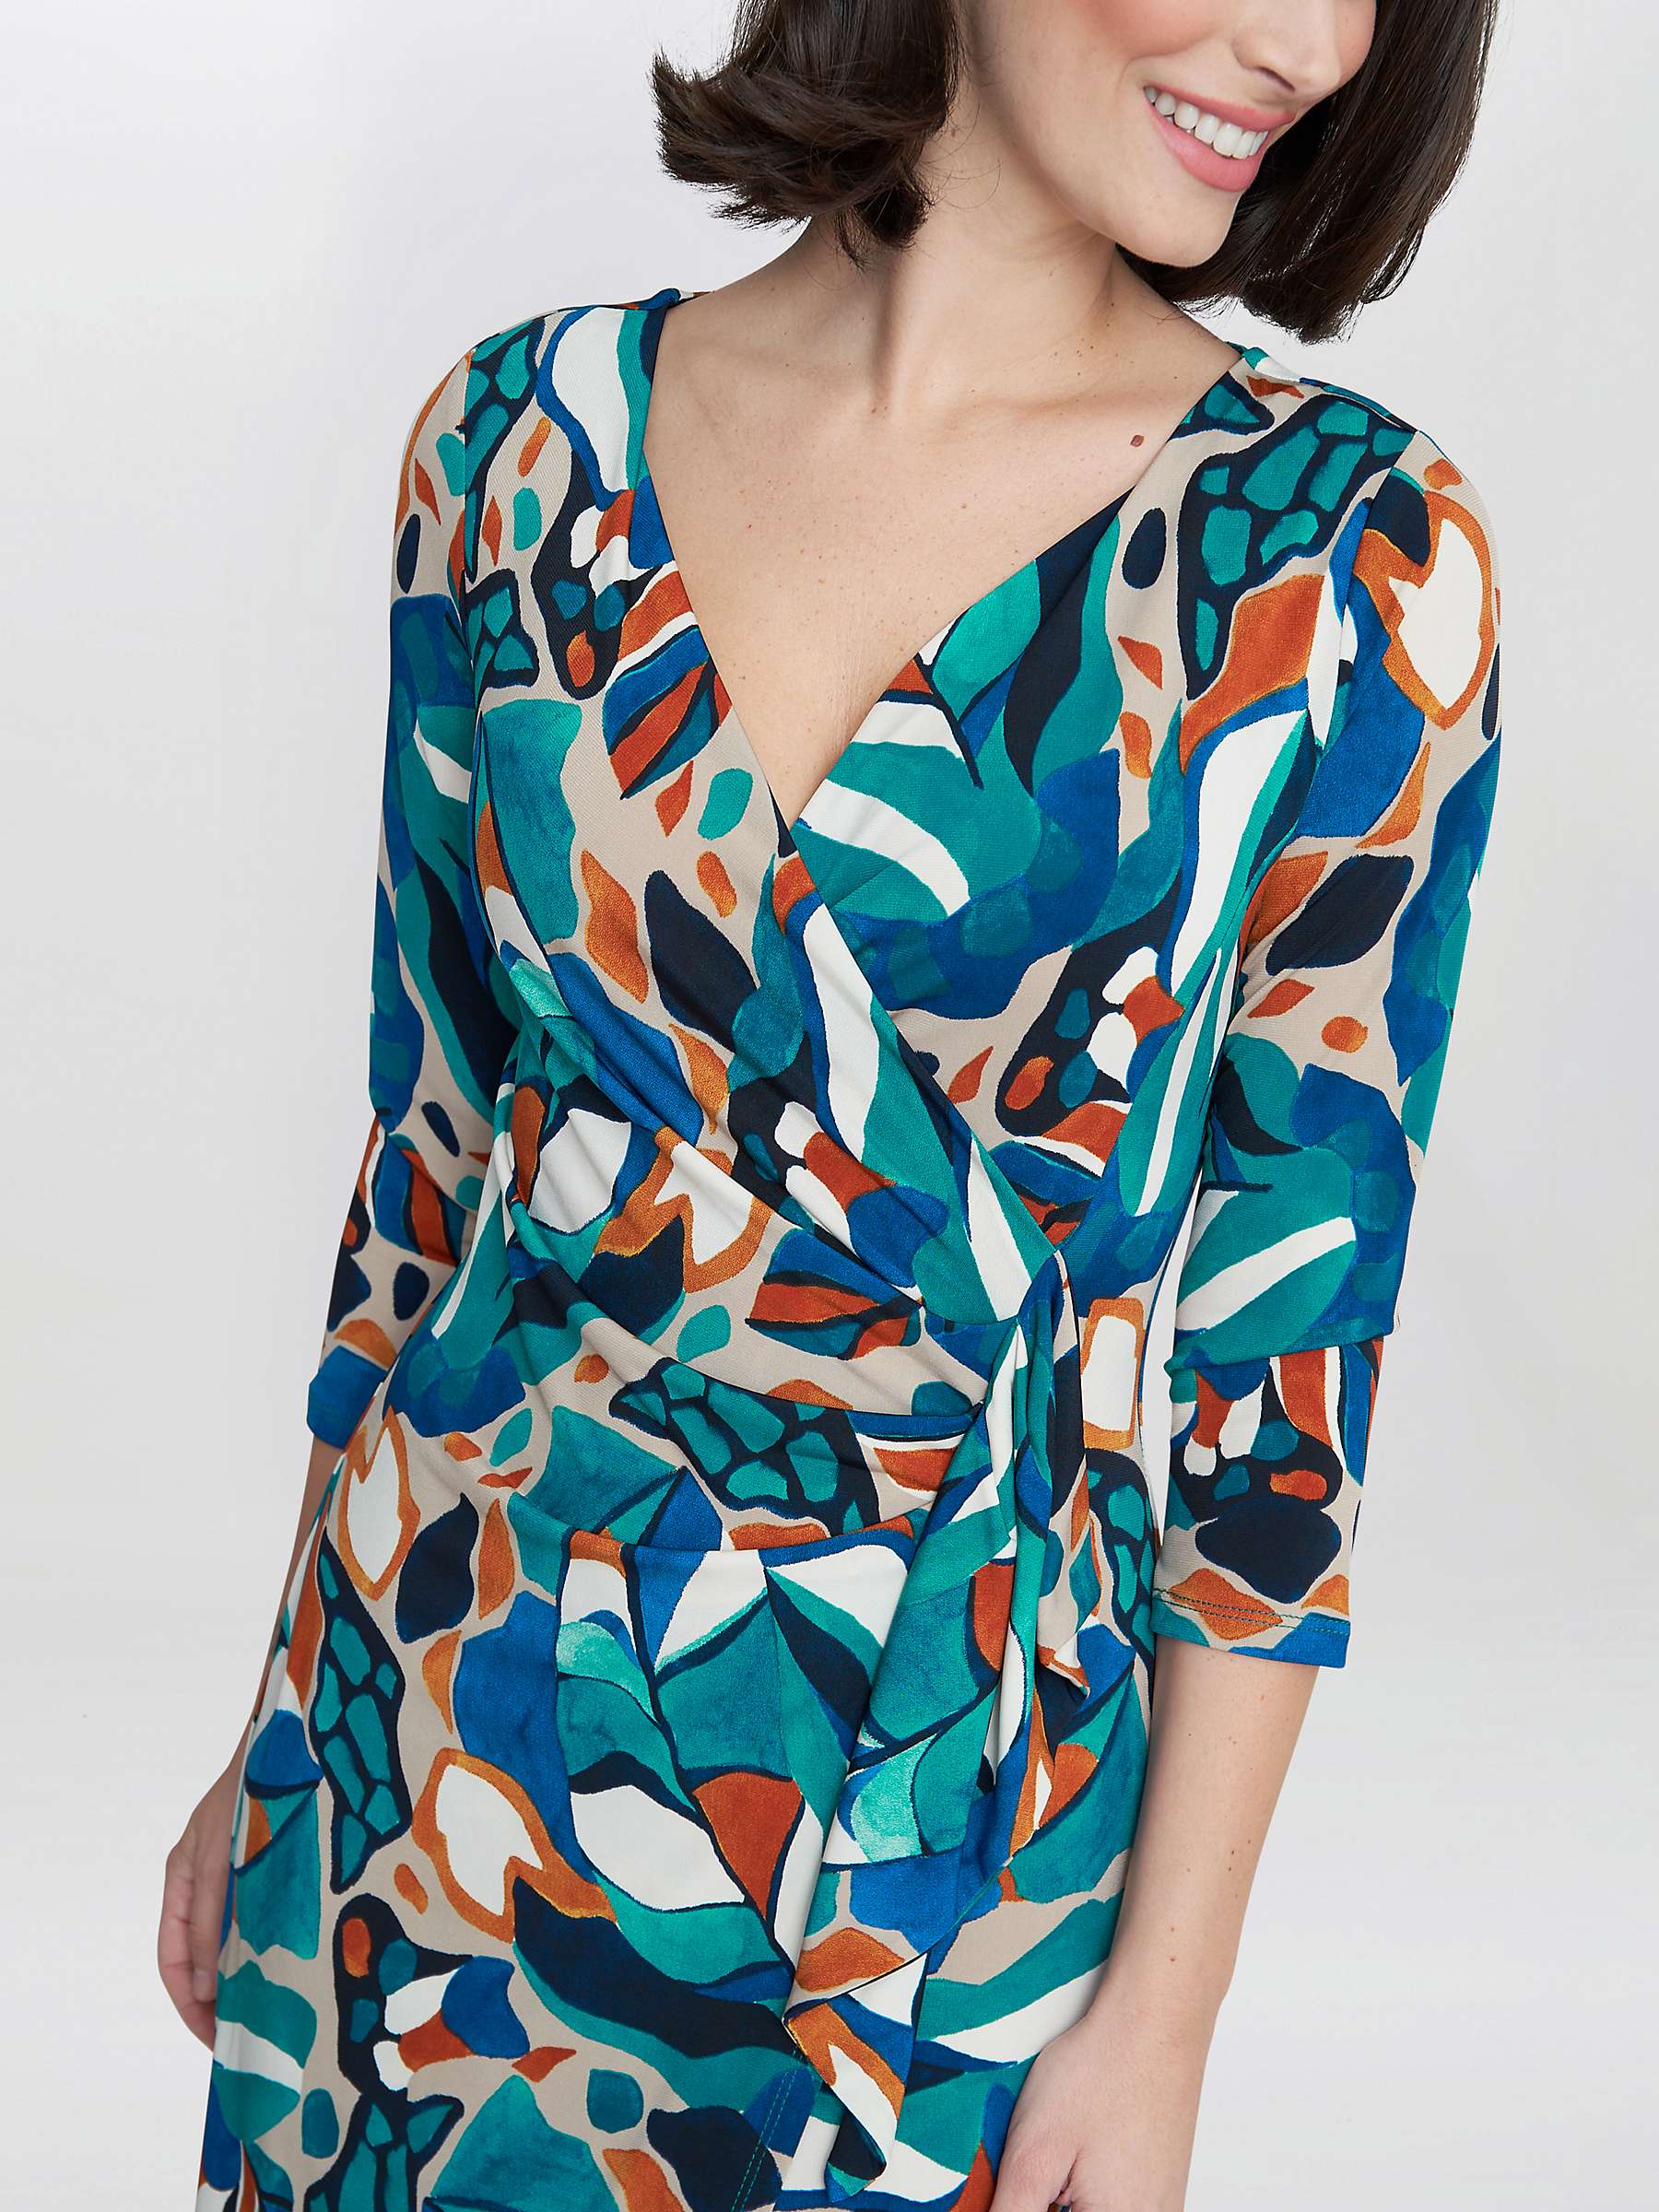 Buy Gina Bacconi Beatrix Printed Jersey Ruffle Dress, Turquoise/Beige Online at johnlewis.com